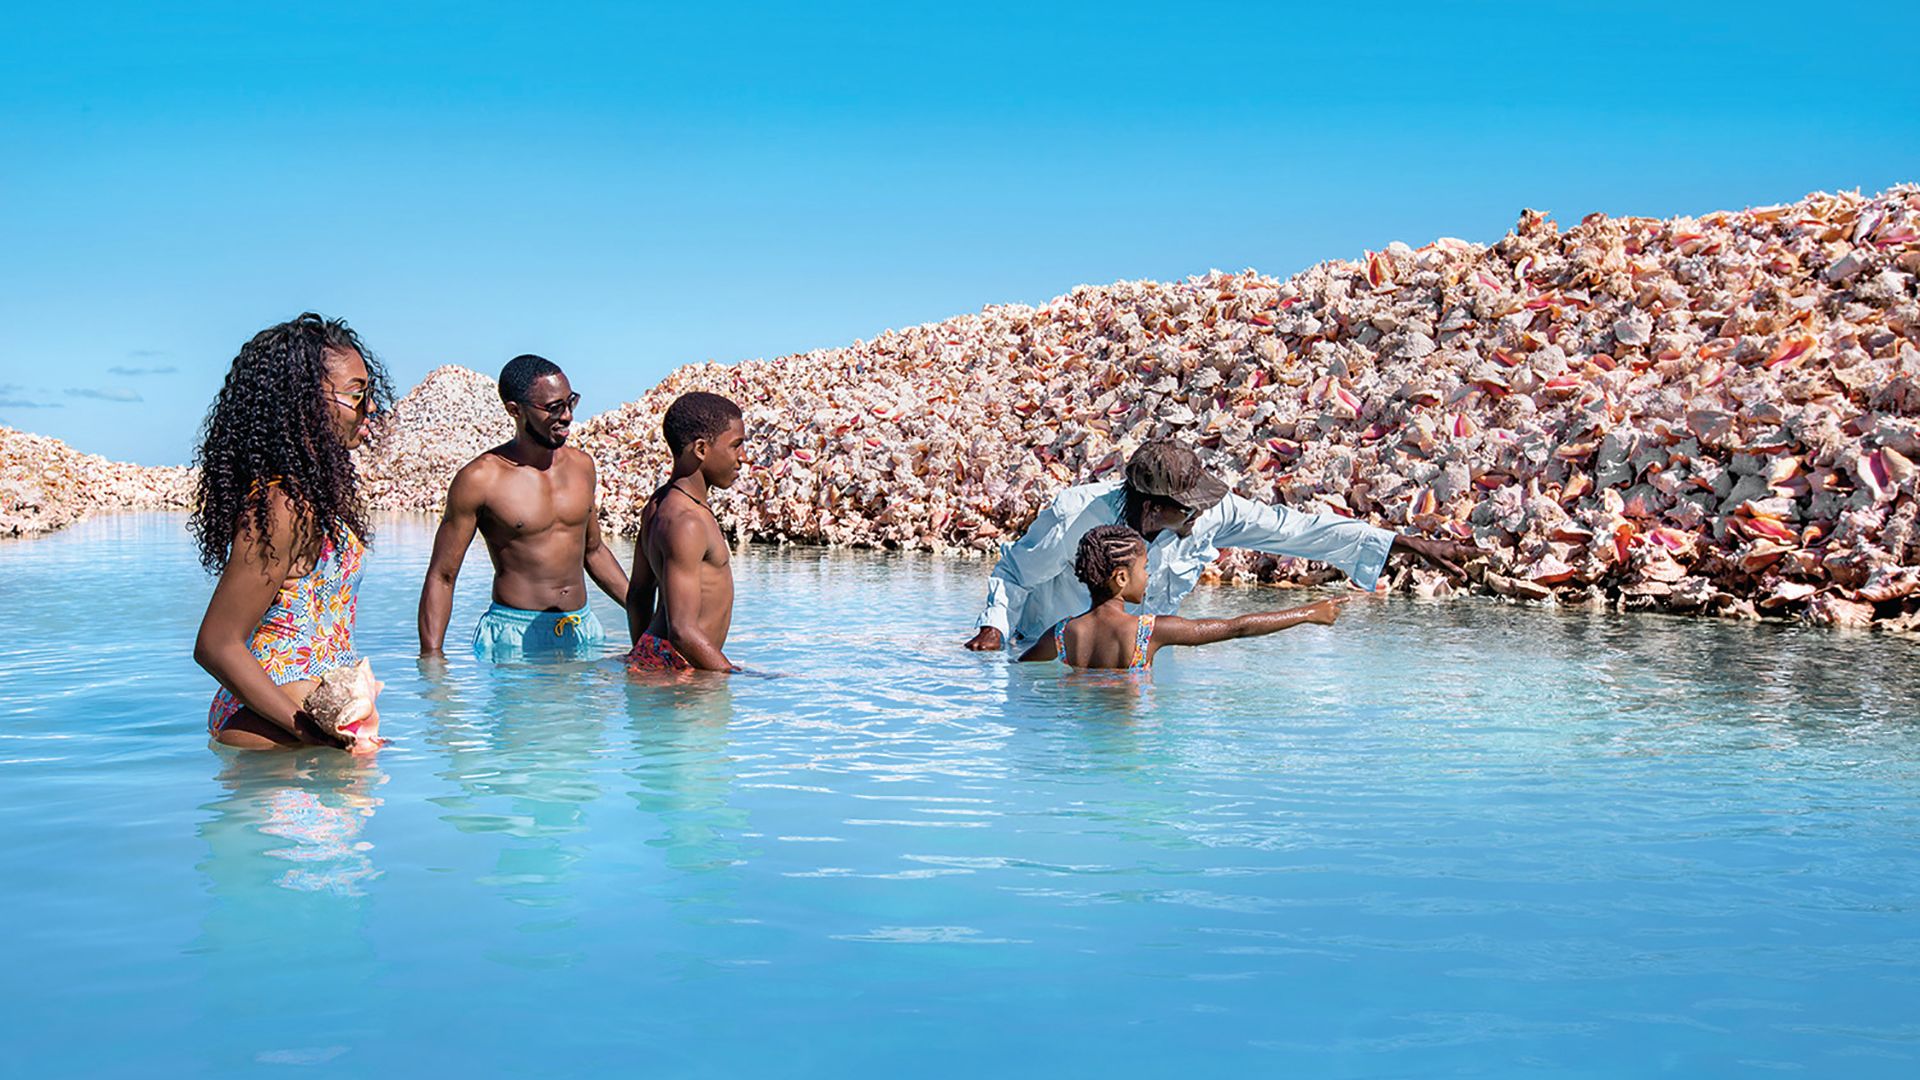 A Group Of People Swimming In The Water